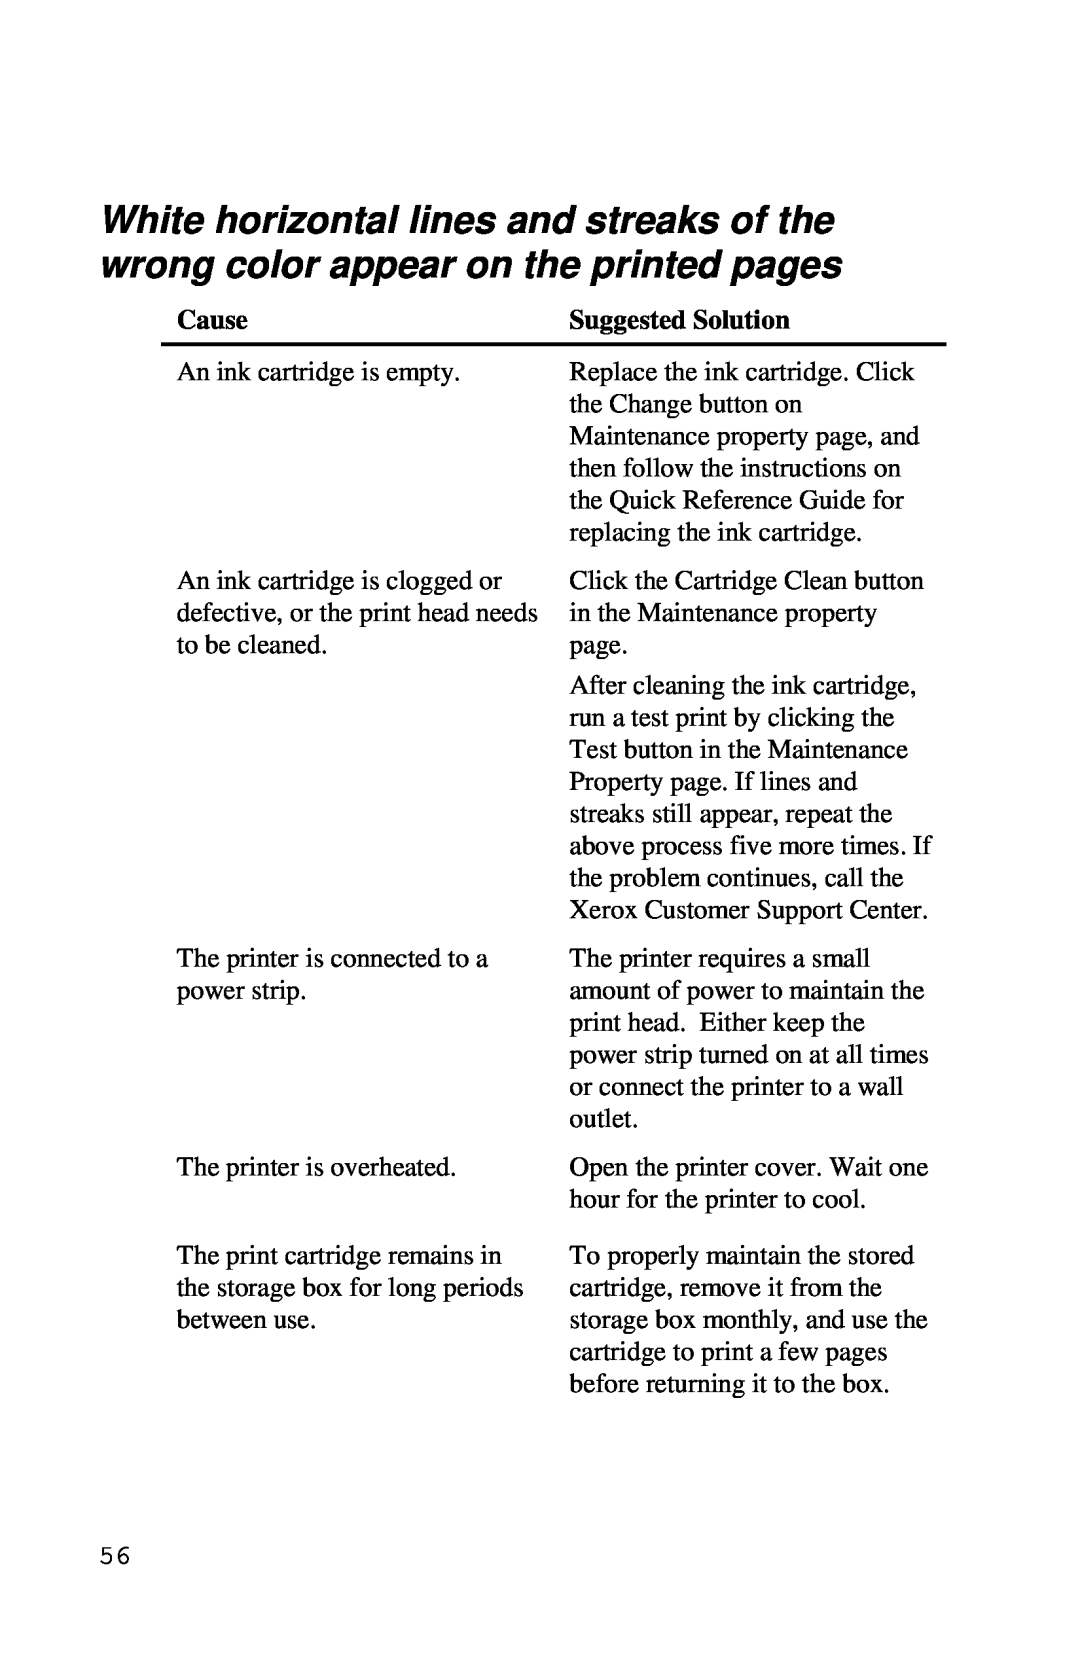 Xerox Inkjet Printer manual Cause, Suggested Solution, An ink cartridge is empty 